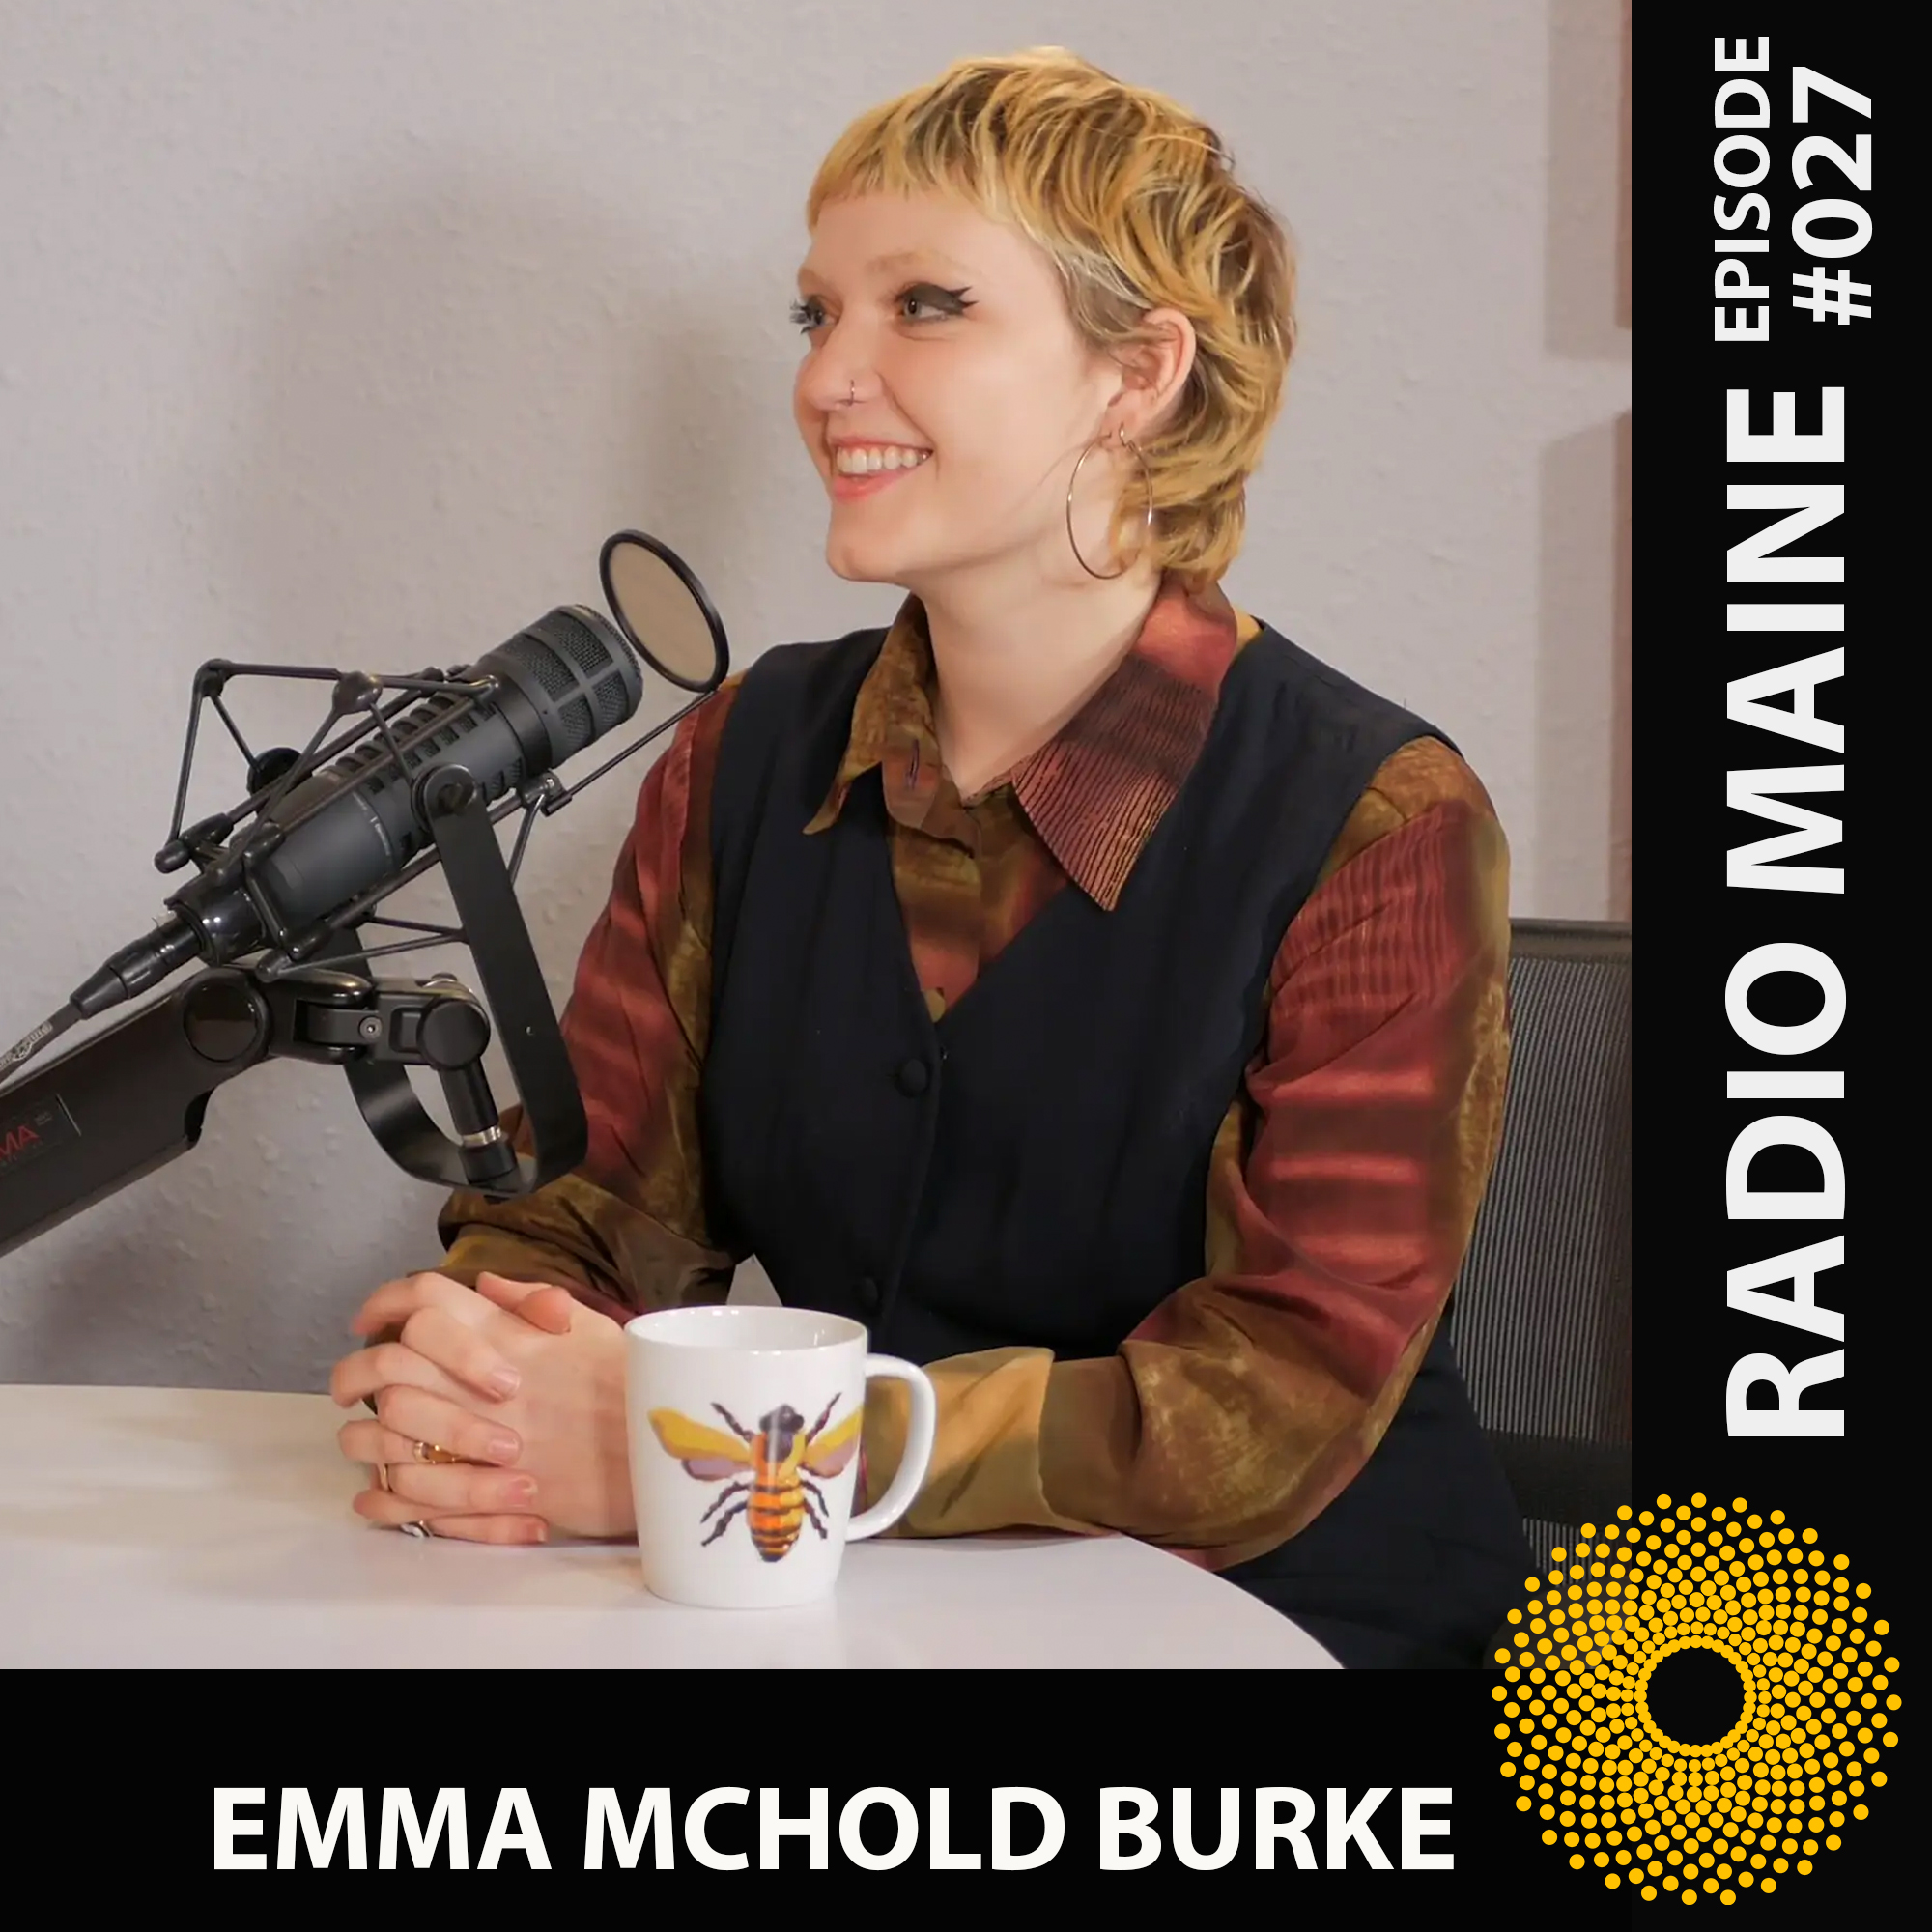 Gallery manager Emma Mchold Burke being interviewed on Radio Maine with Dr. Lisa Belisle